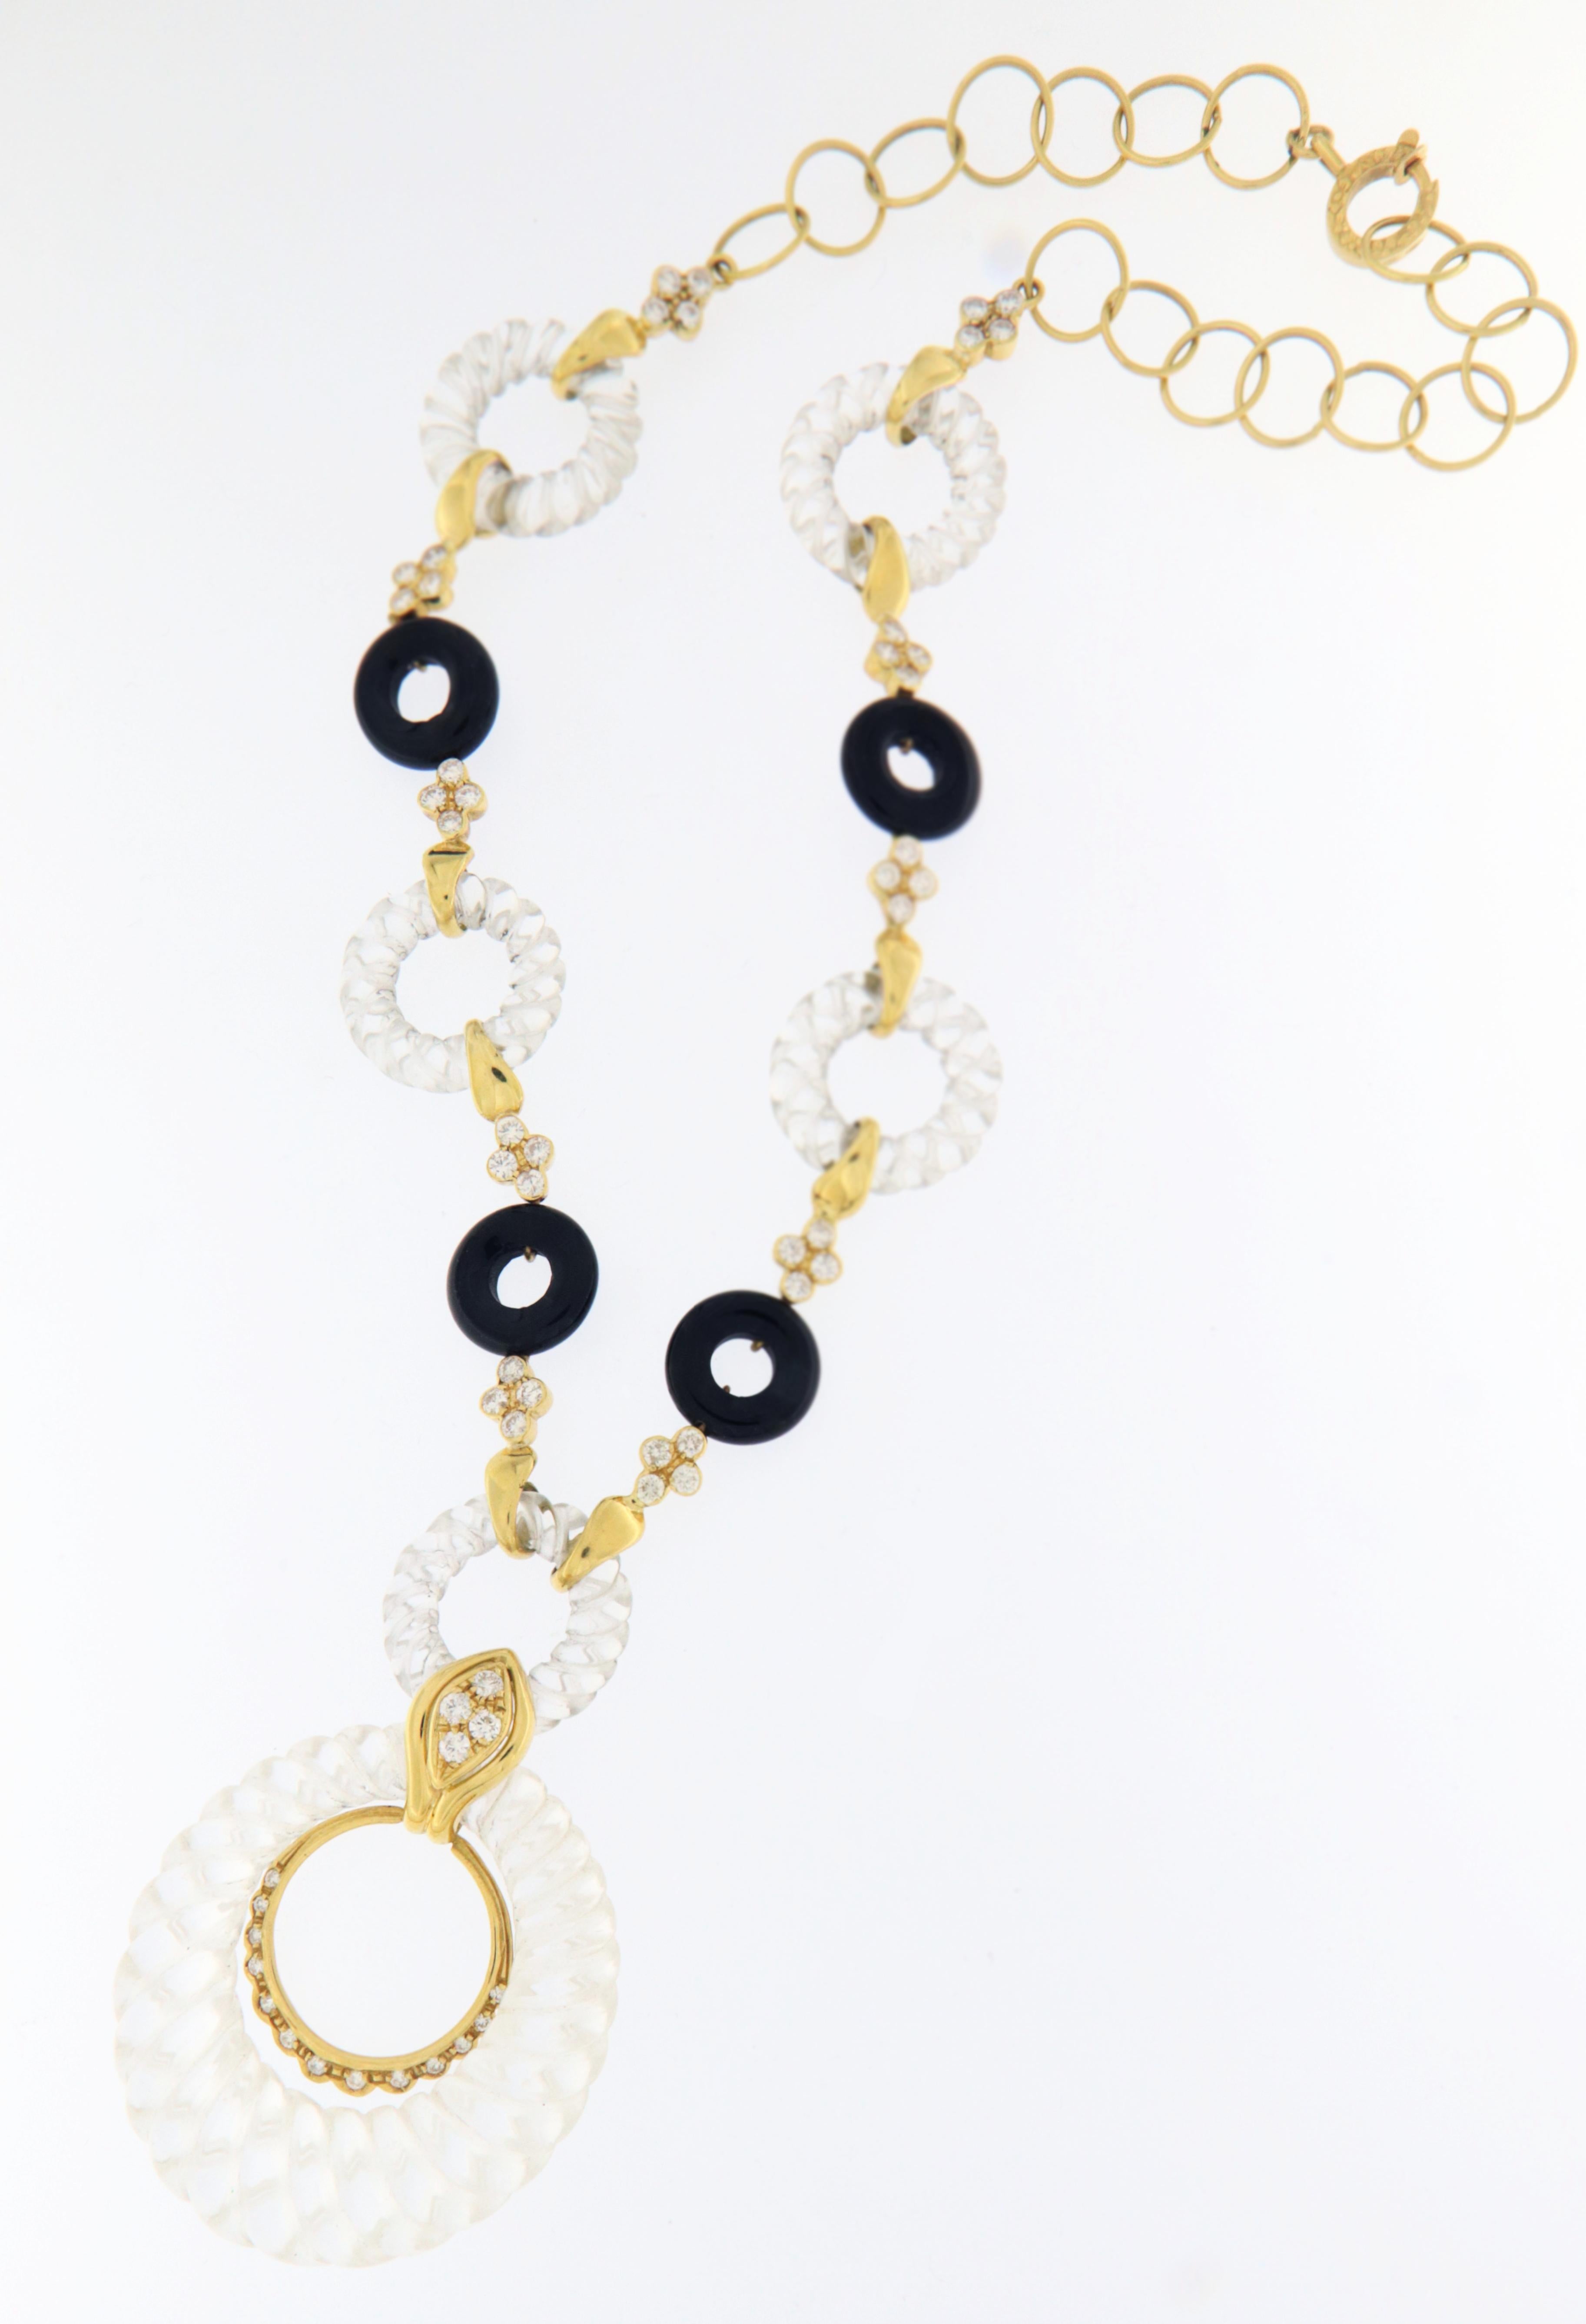 Beautiful 18 karat yellow gold pendant necklace.Handmade by our craftsmen assembled with rock crystal diamonds and onyx

Diamonds weight 3.74 karat
Necklace total weight 59.60 grams
Necklace length 45 cm